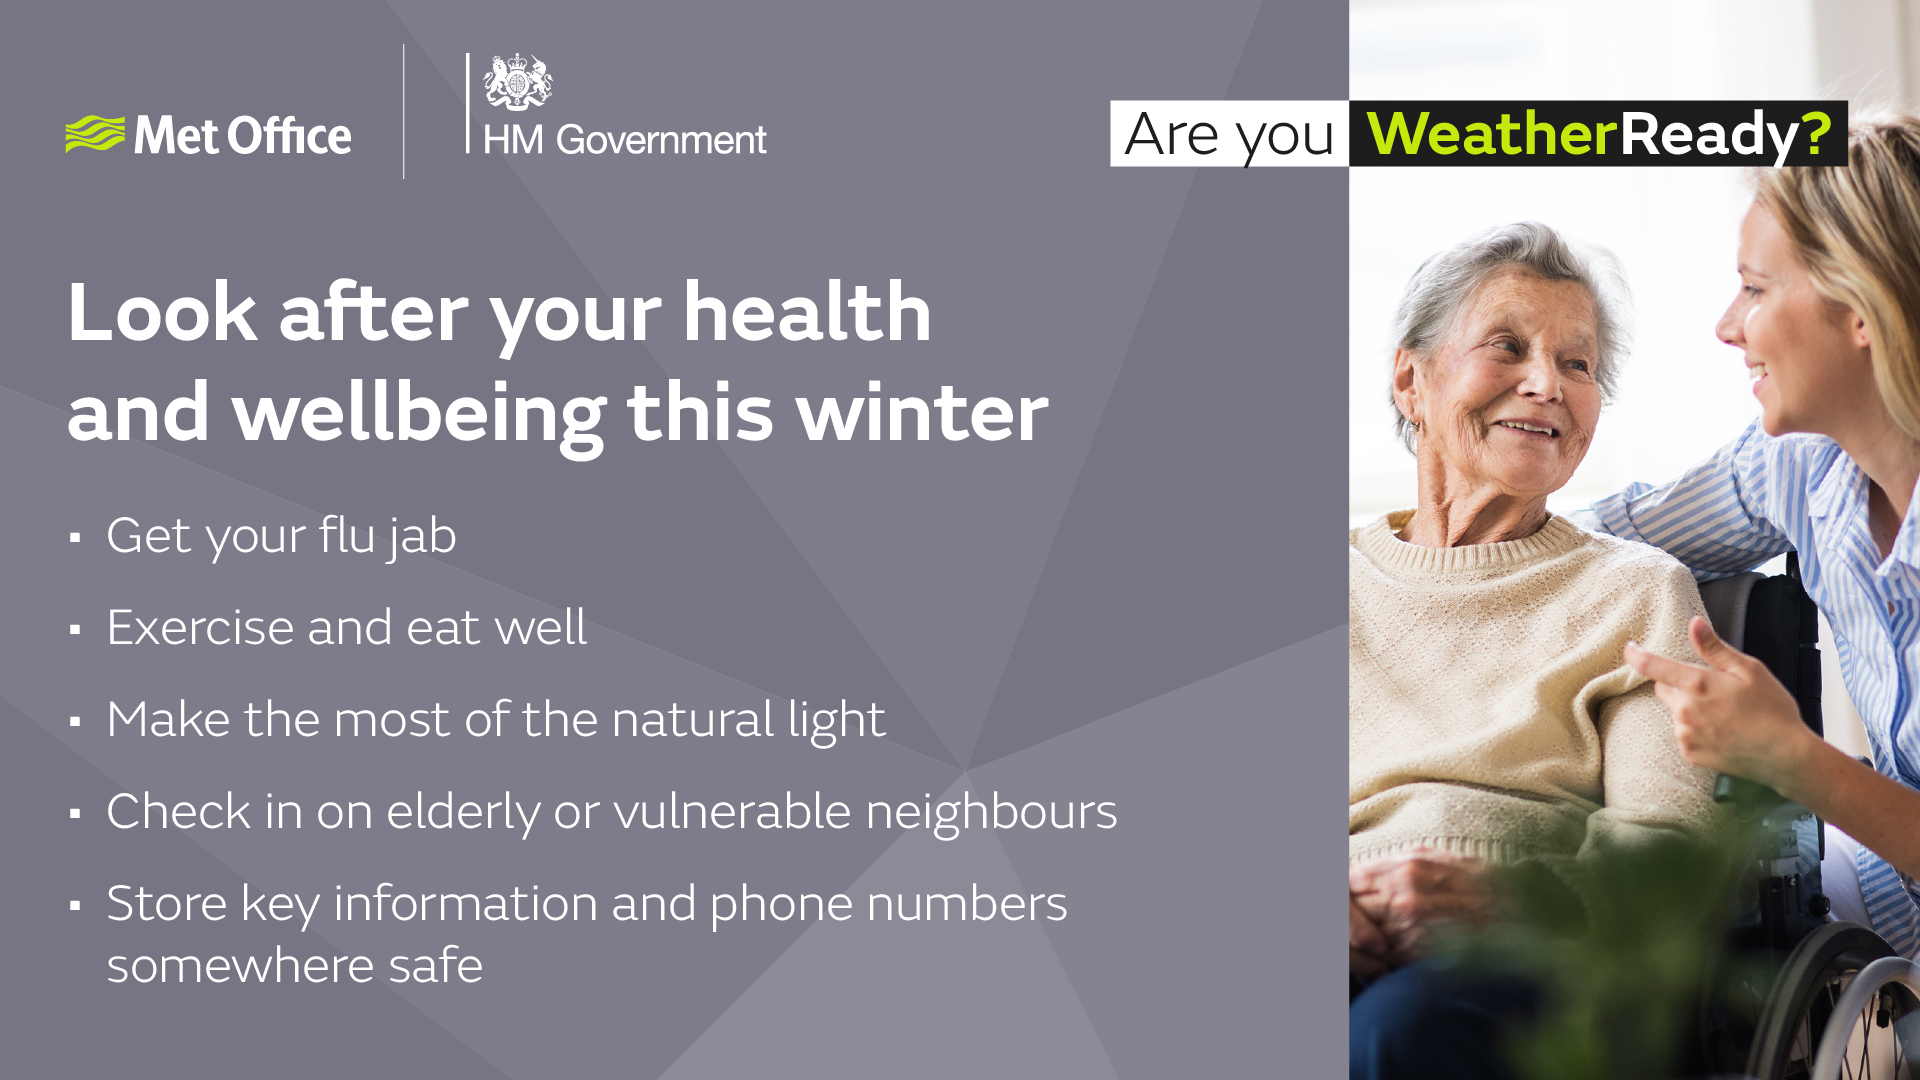 Look after your health and wellbeing this winter. Get your flu jab. Exercise and eat well. Make the most of the natural light. Check in on elderly or vulnerable neighbours. Store key information and phone numbers somewhere safe.